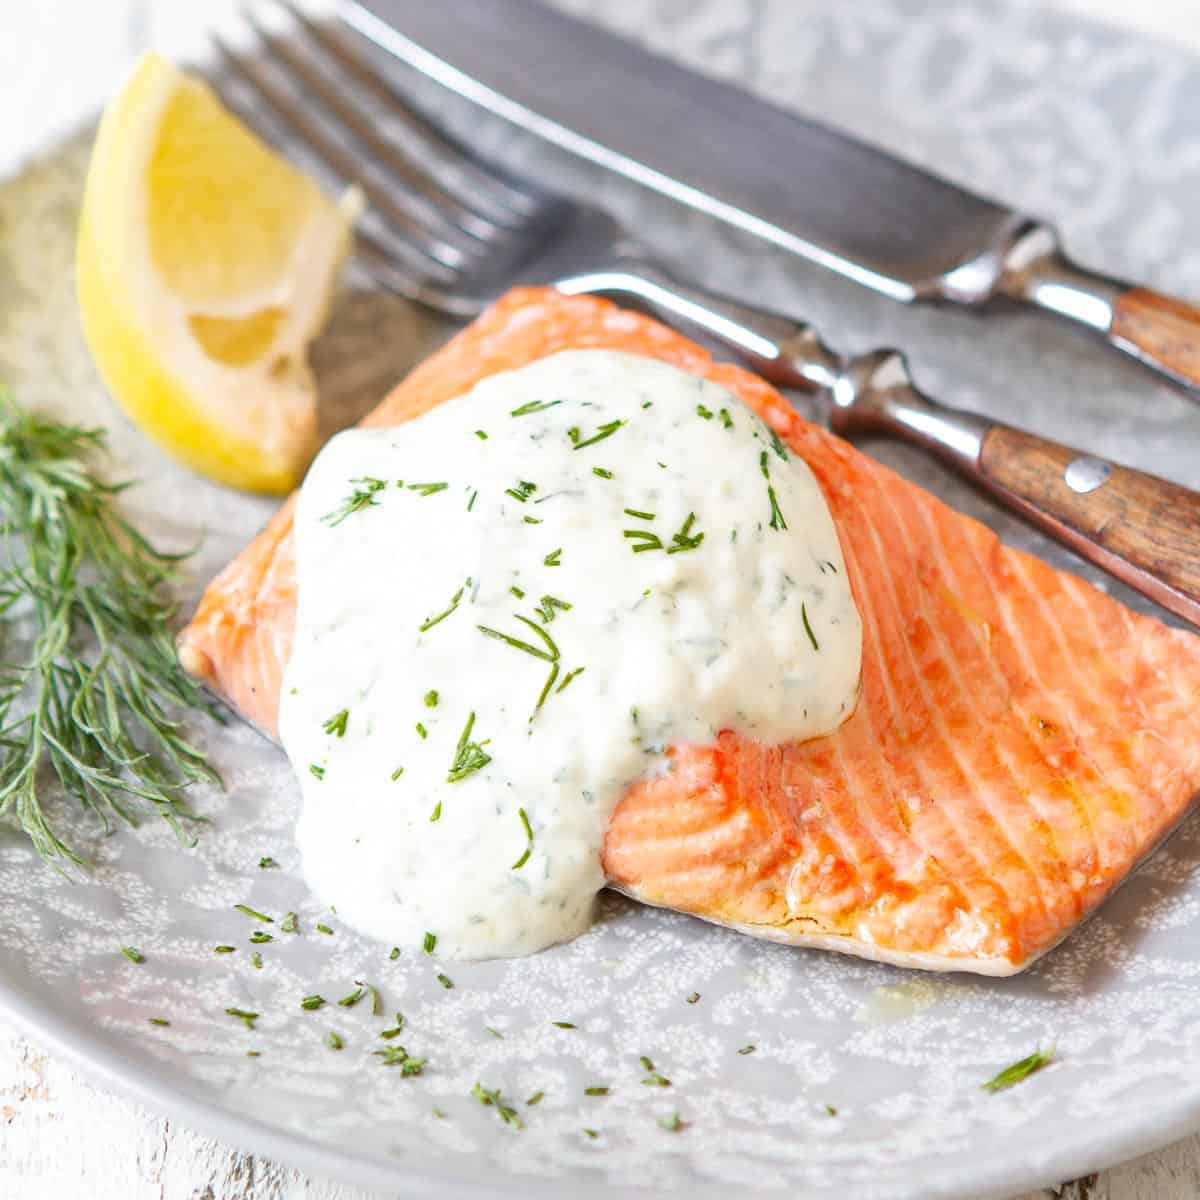 Poached salmon with a yogurt dill sauce on a gray plate.